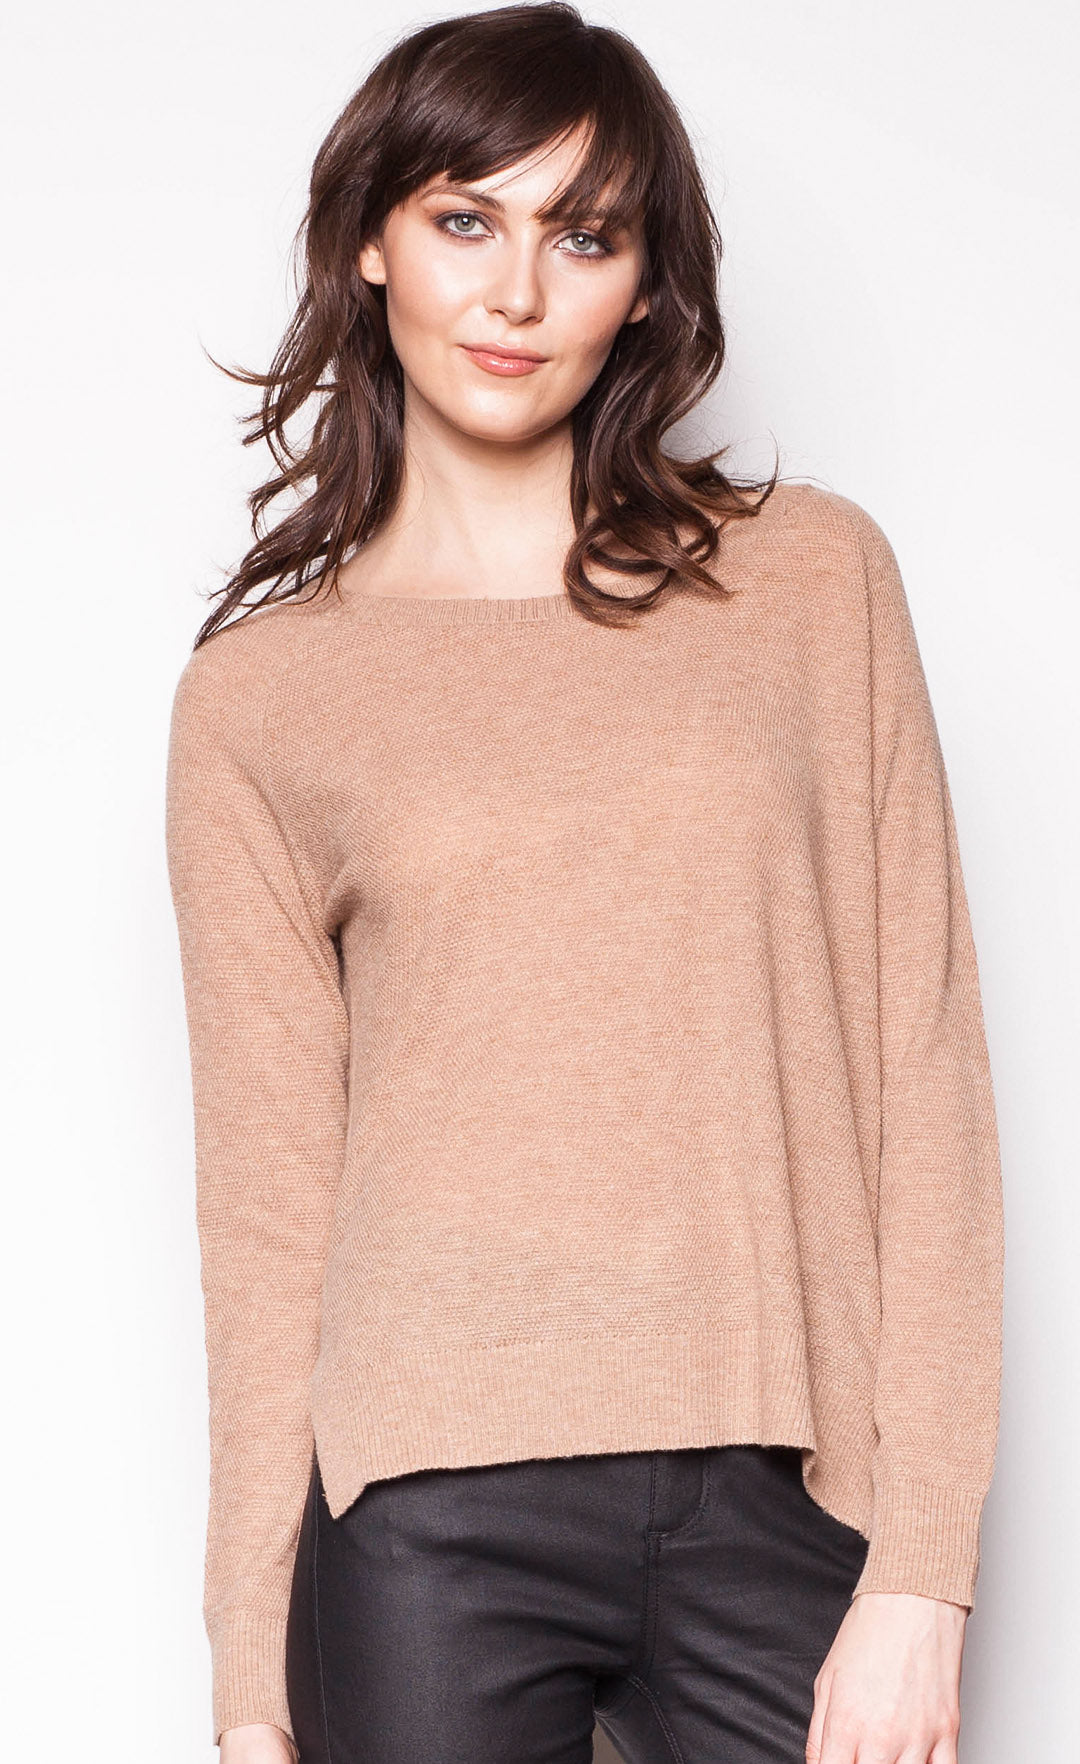 Basique Love Sweater - Pink Martini Collection